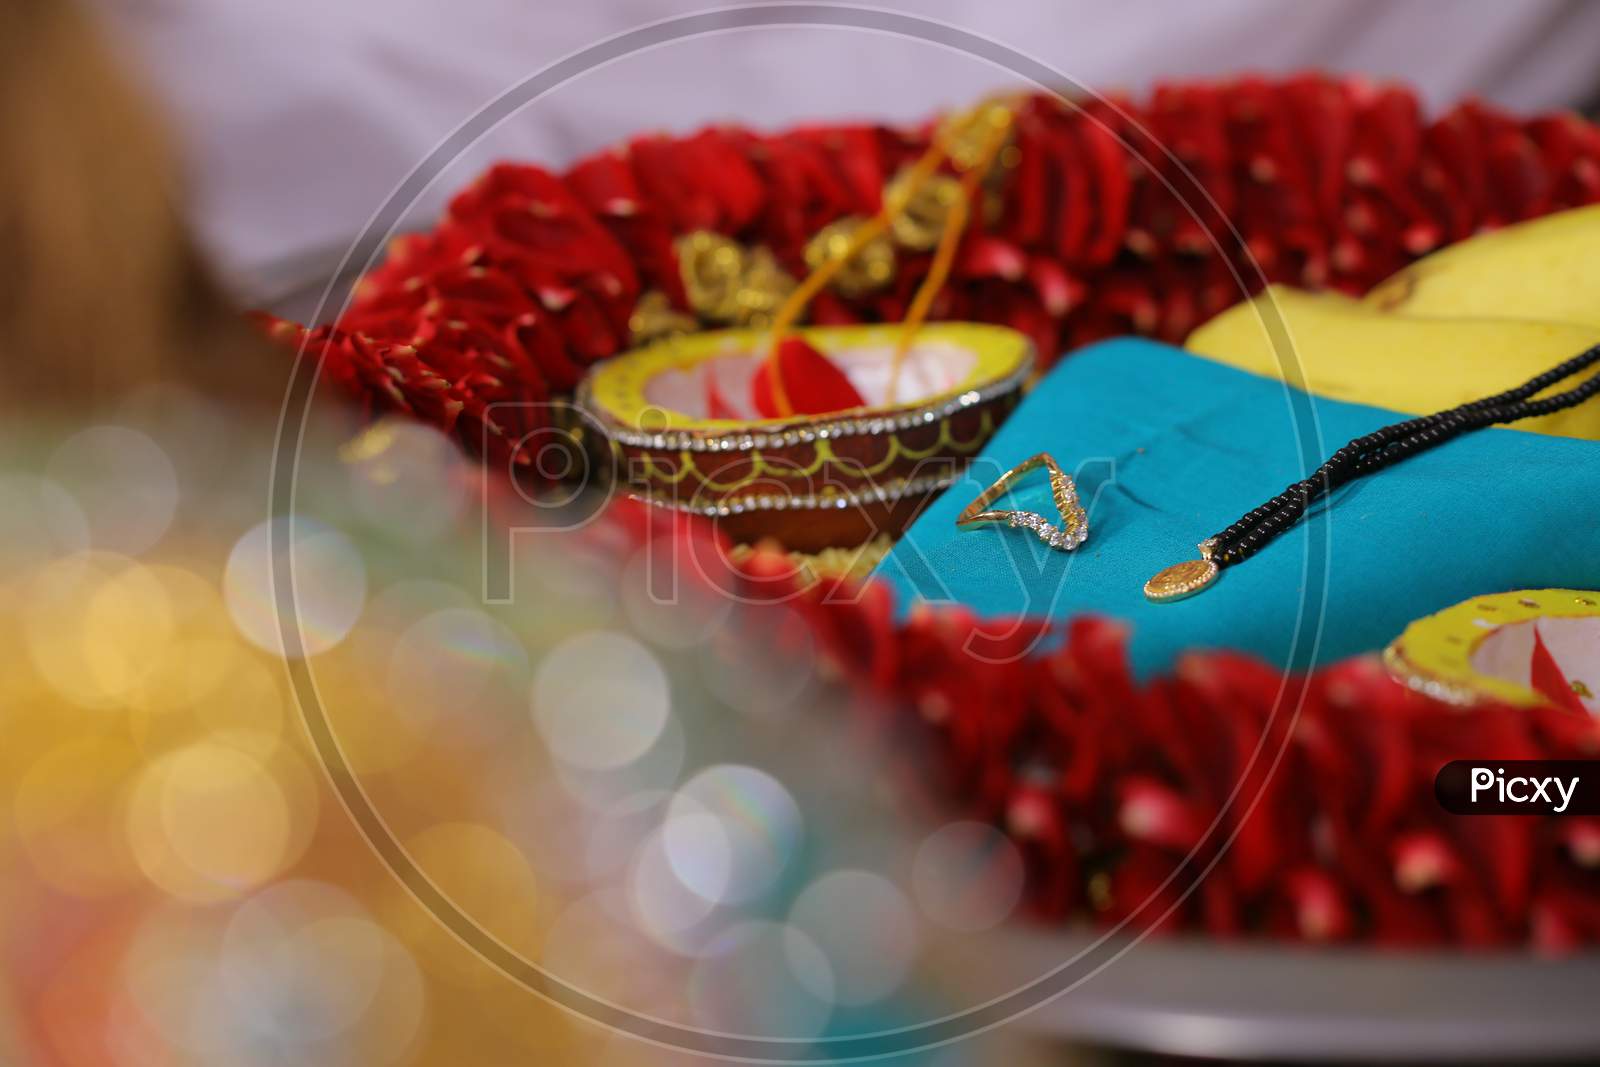 Engagement ring and other necklace during wedding puja